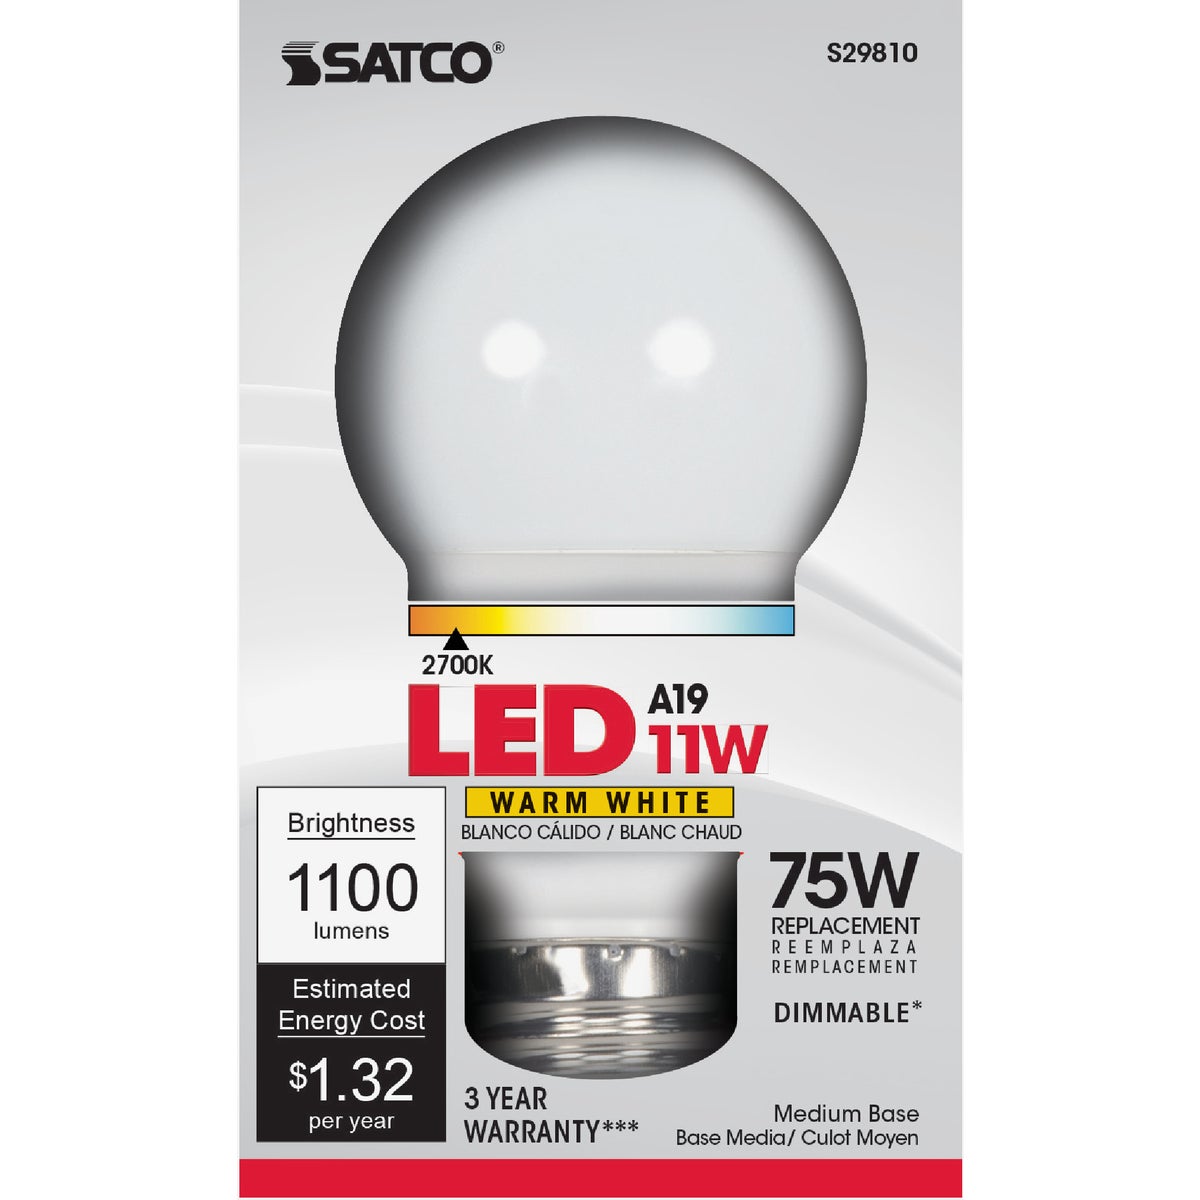 Satco 75W Equivalent Warm White A19 Medium Dimmable LED Light Bulb